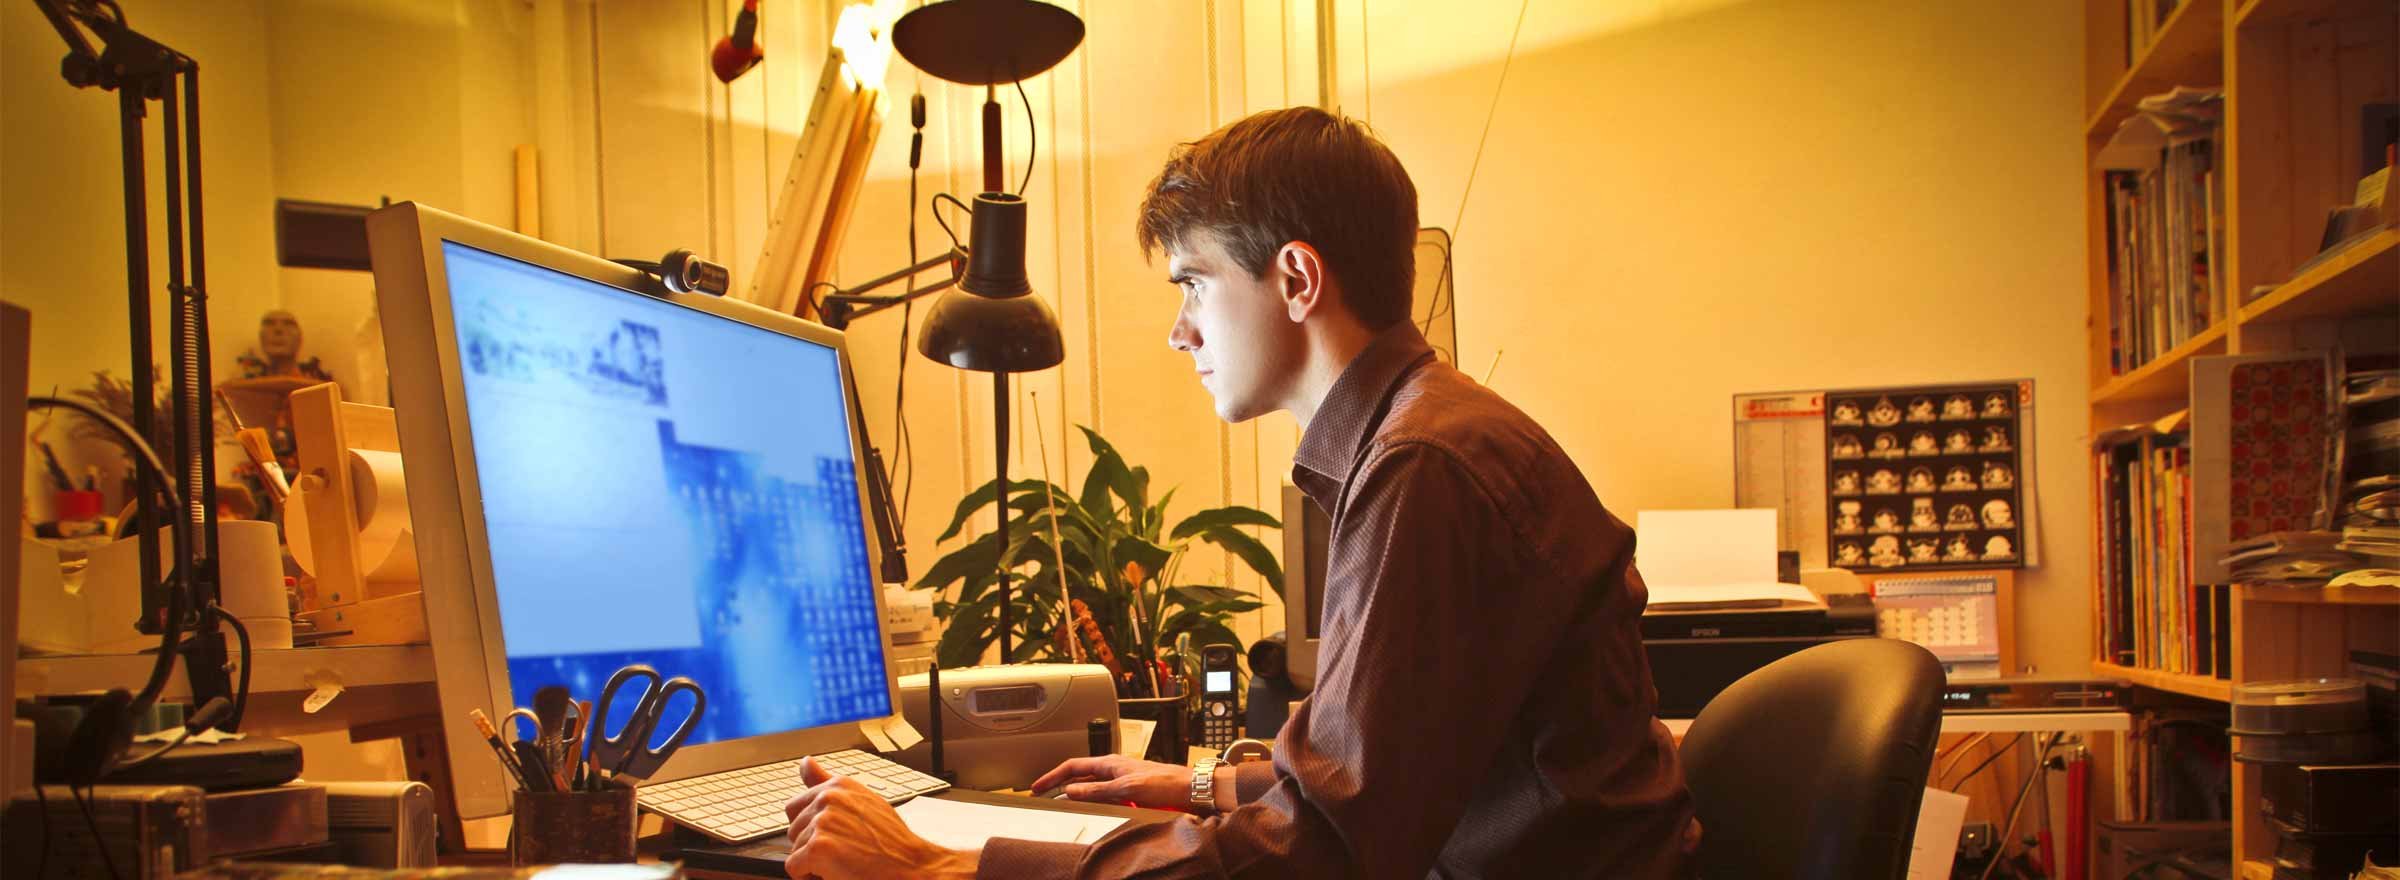 man working at home on a large computer screen